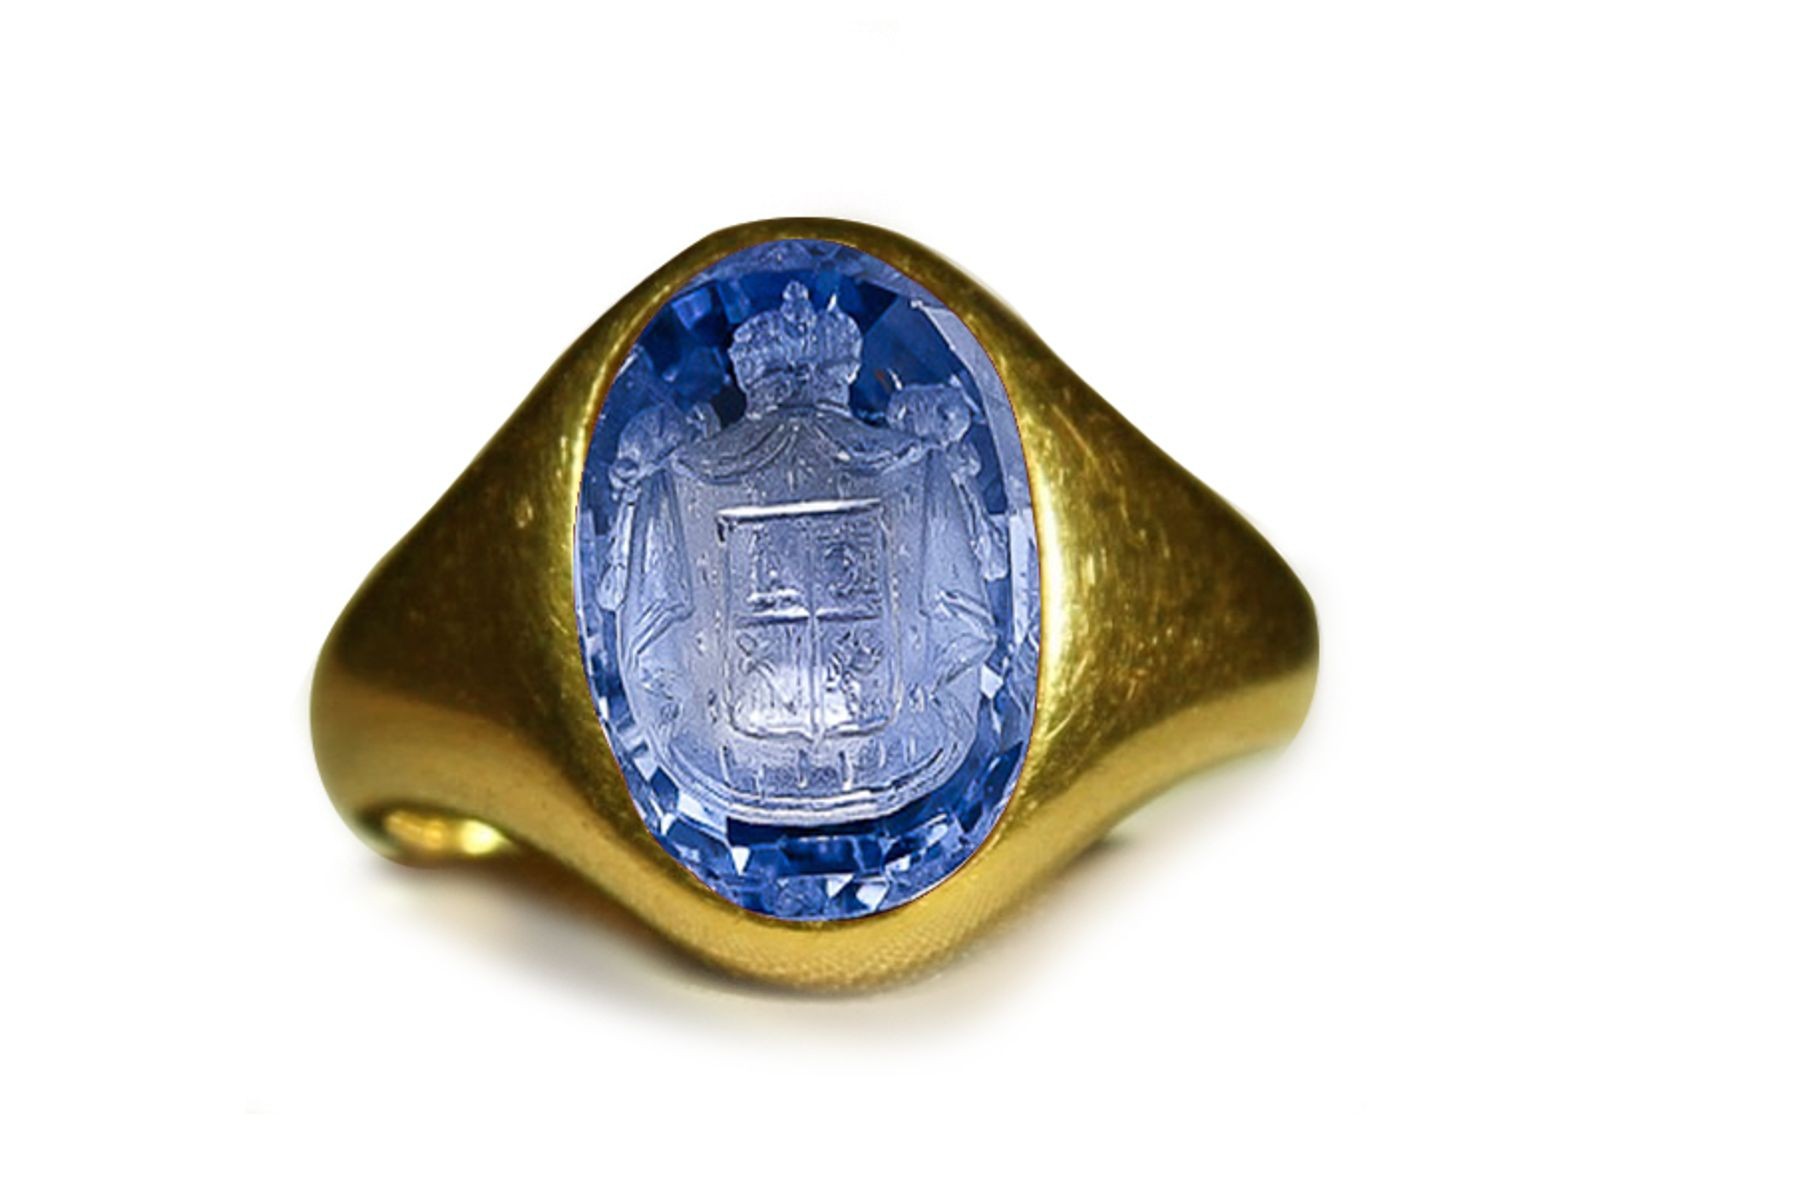 Men's Engraved Cut Rings This is an rich Ancient Rich Velvety Dark Blue Color & Vibrant Burma Sapphire Eyes in Gold Signet Ring 